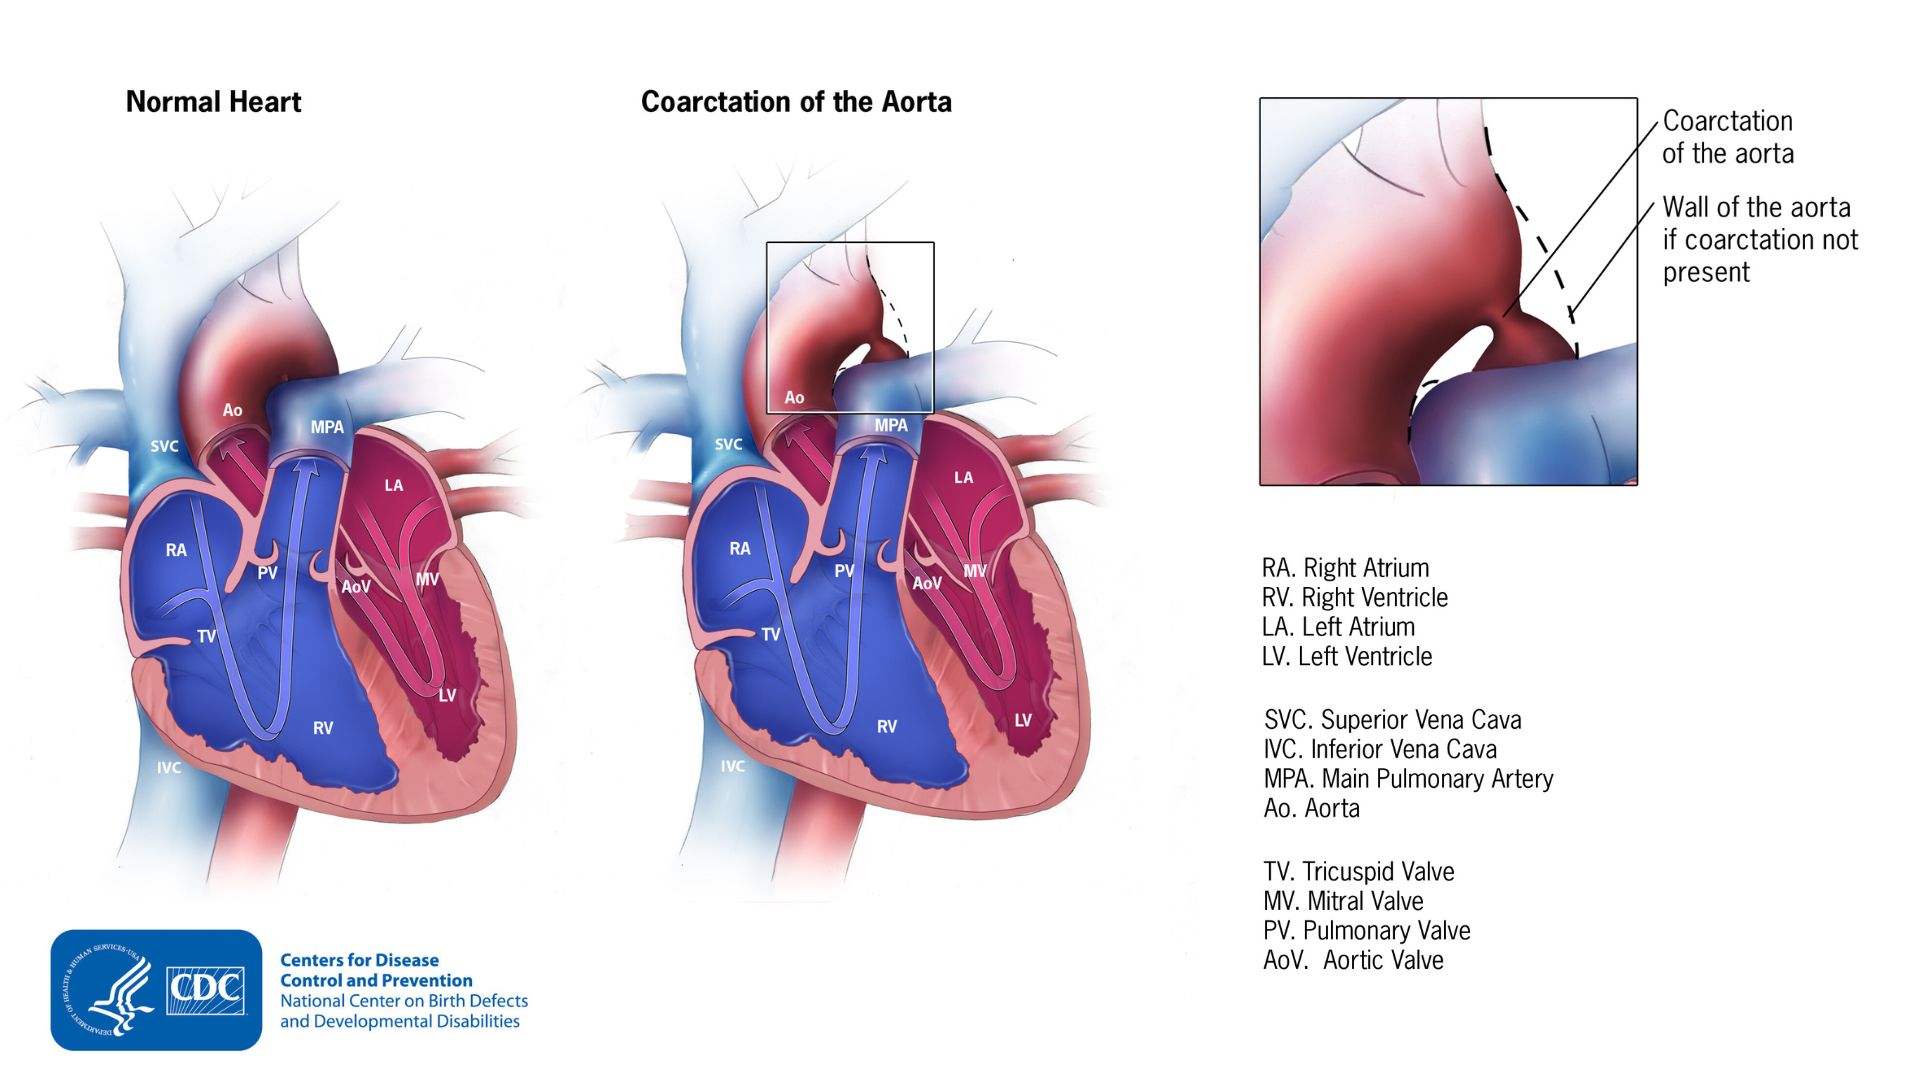 Normal heart to the left, heart with a coarctation of the aorta in the middle, and an enlarged view the coarctation in the upper right